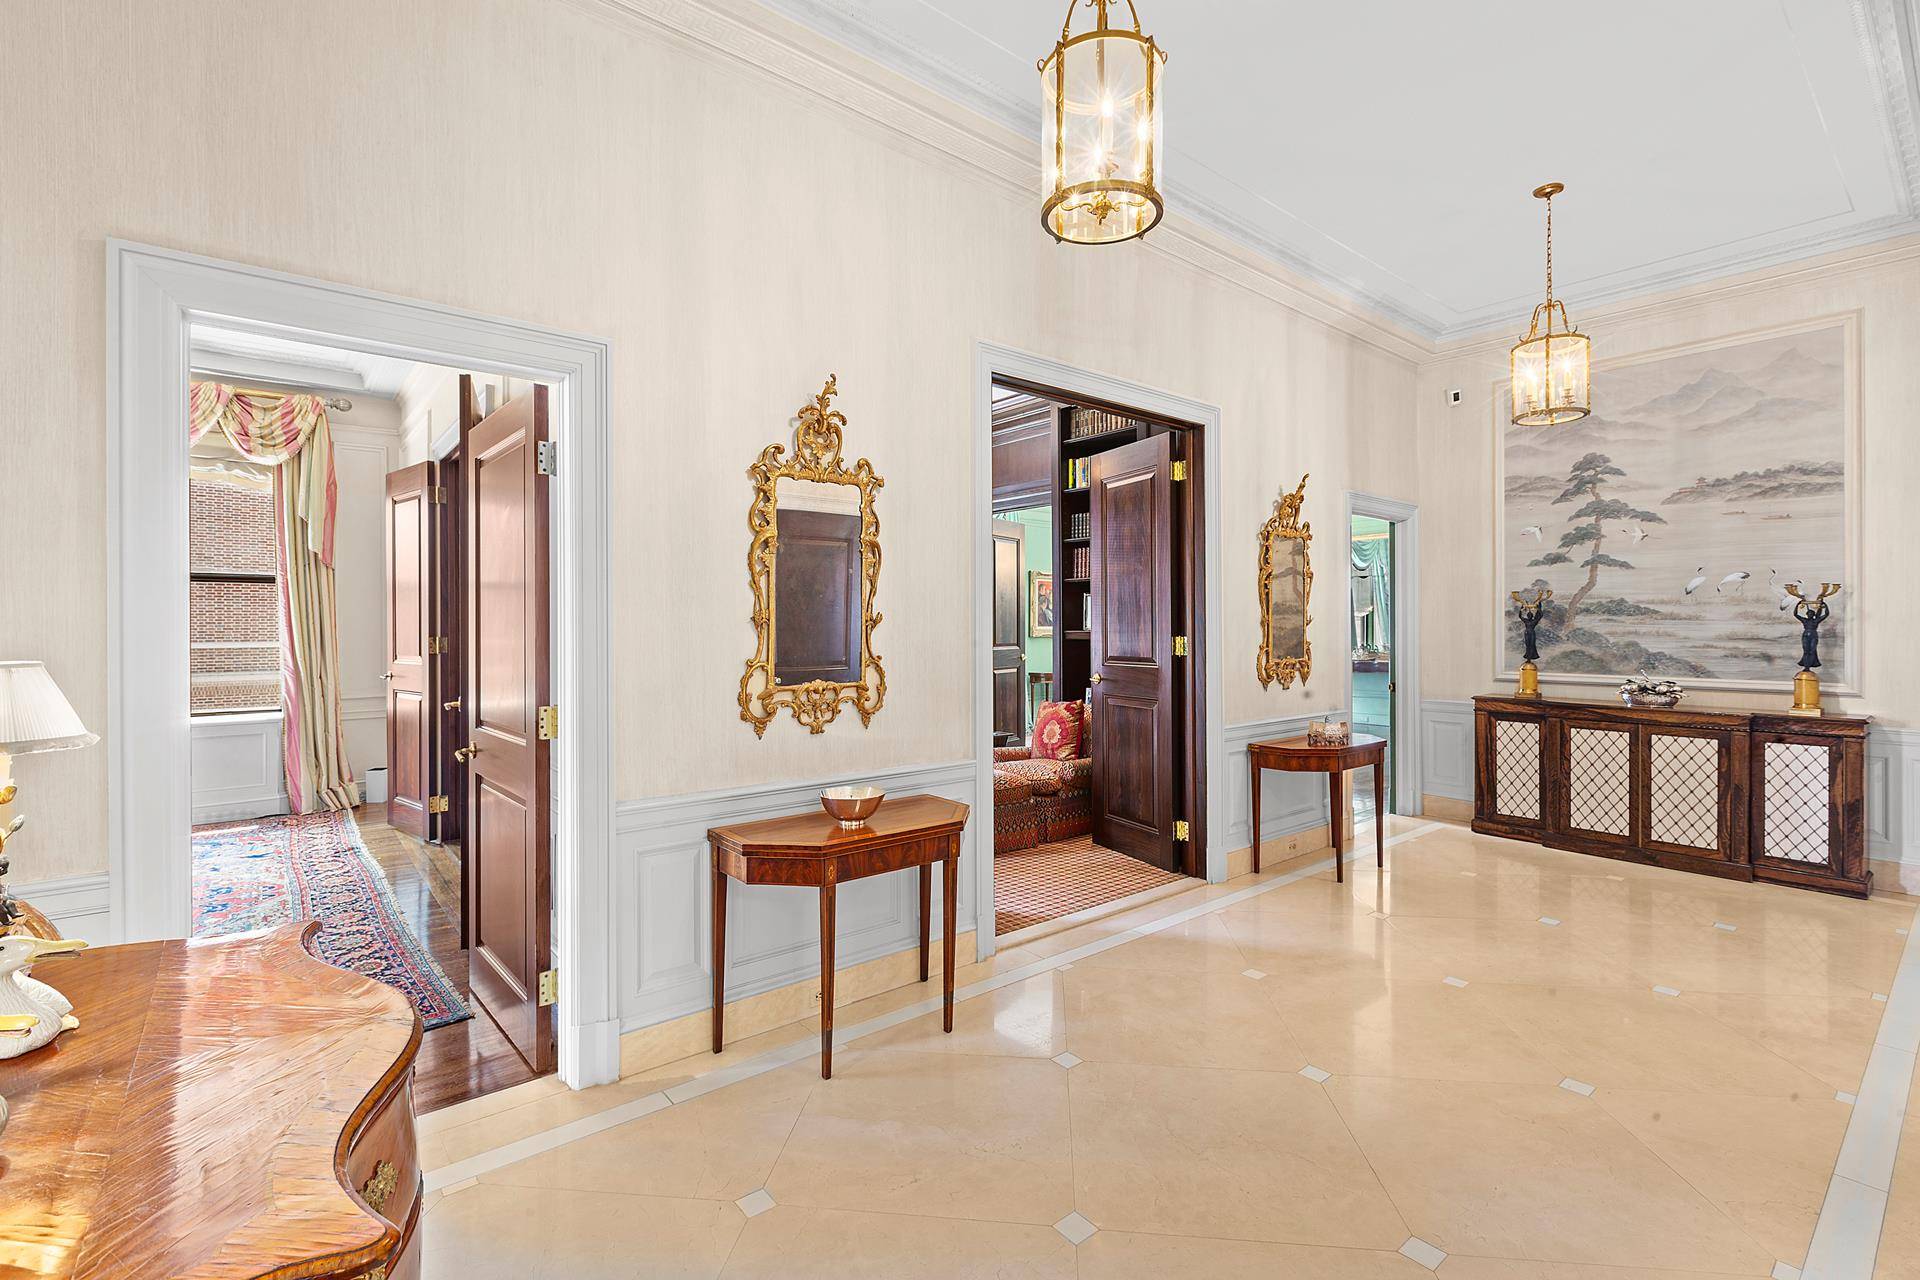 Step out of your private elevator vestibule into the entrance gallery and be greeted by a light filled Park Avenue home with large windows and nearly 11.